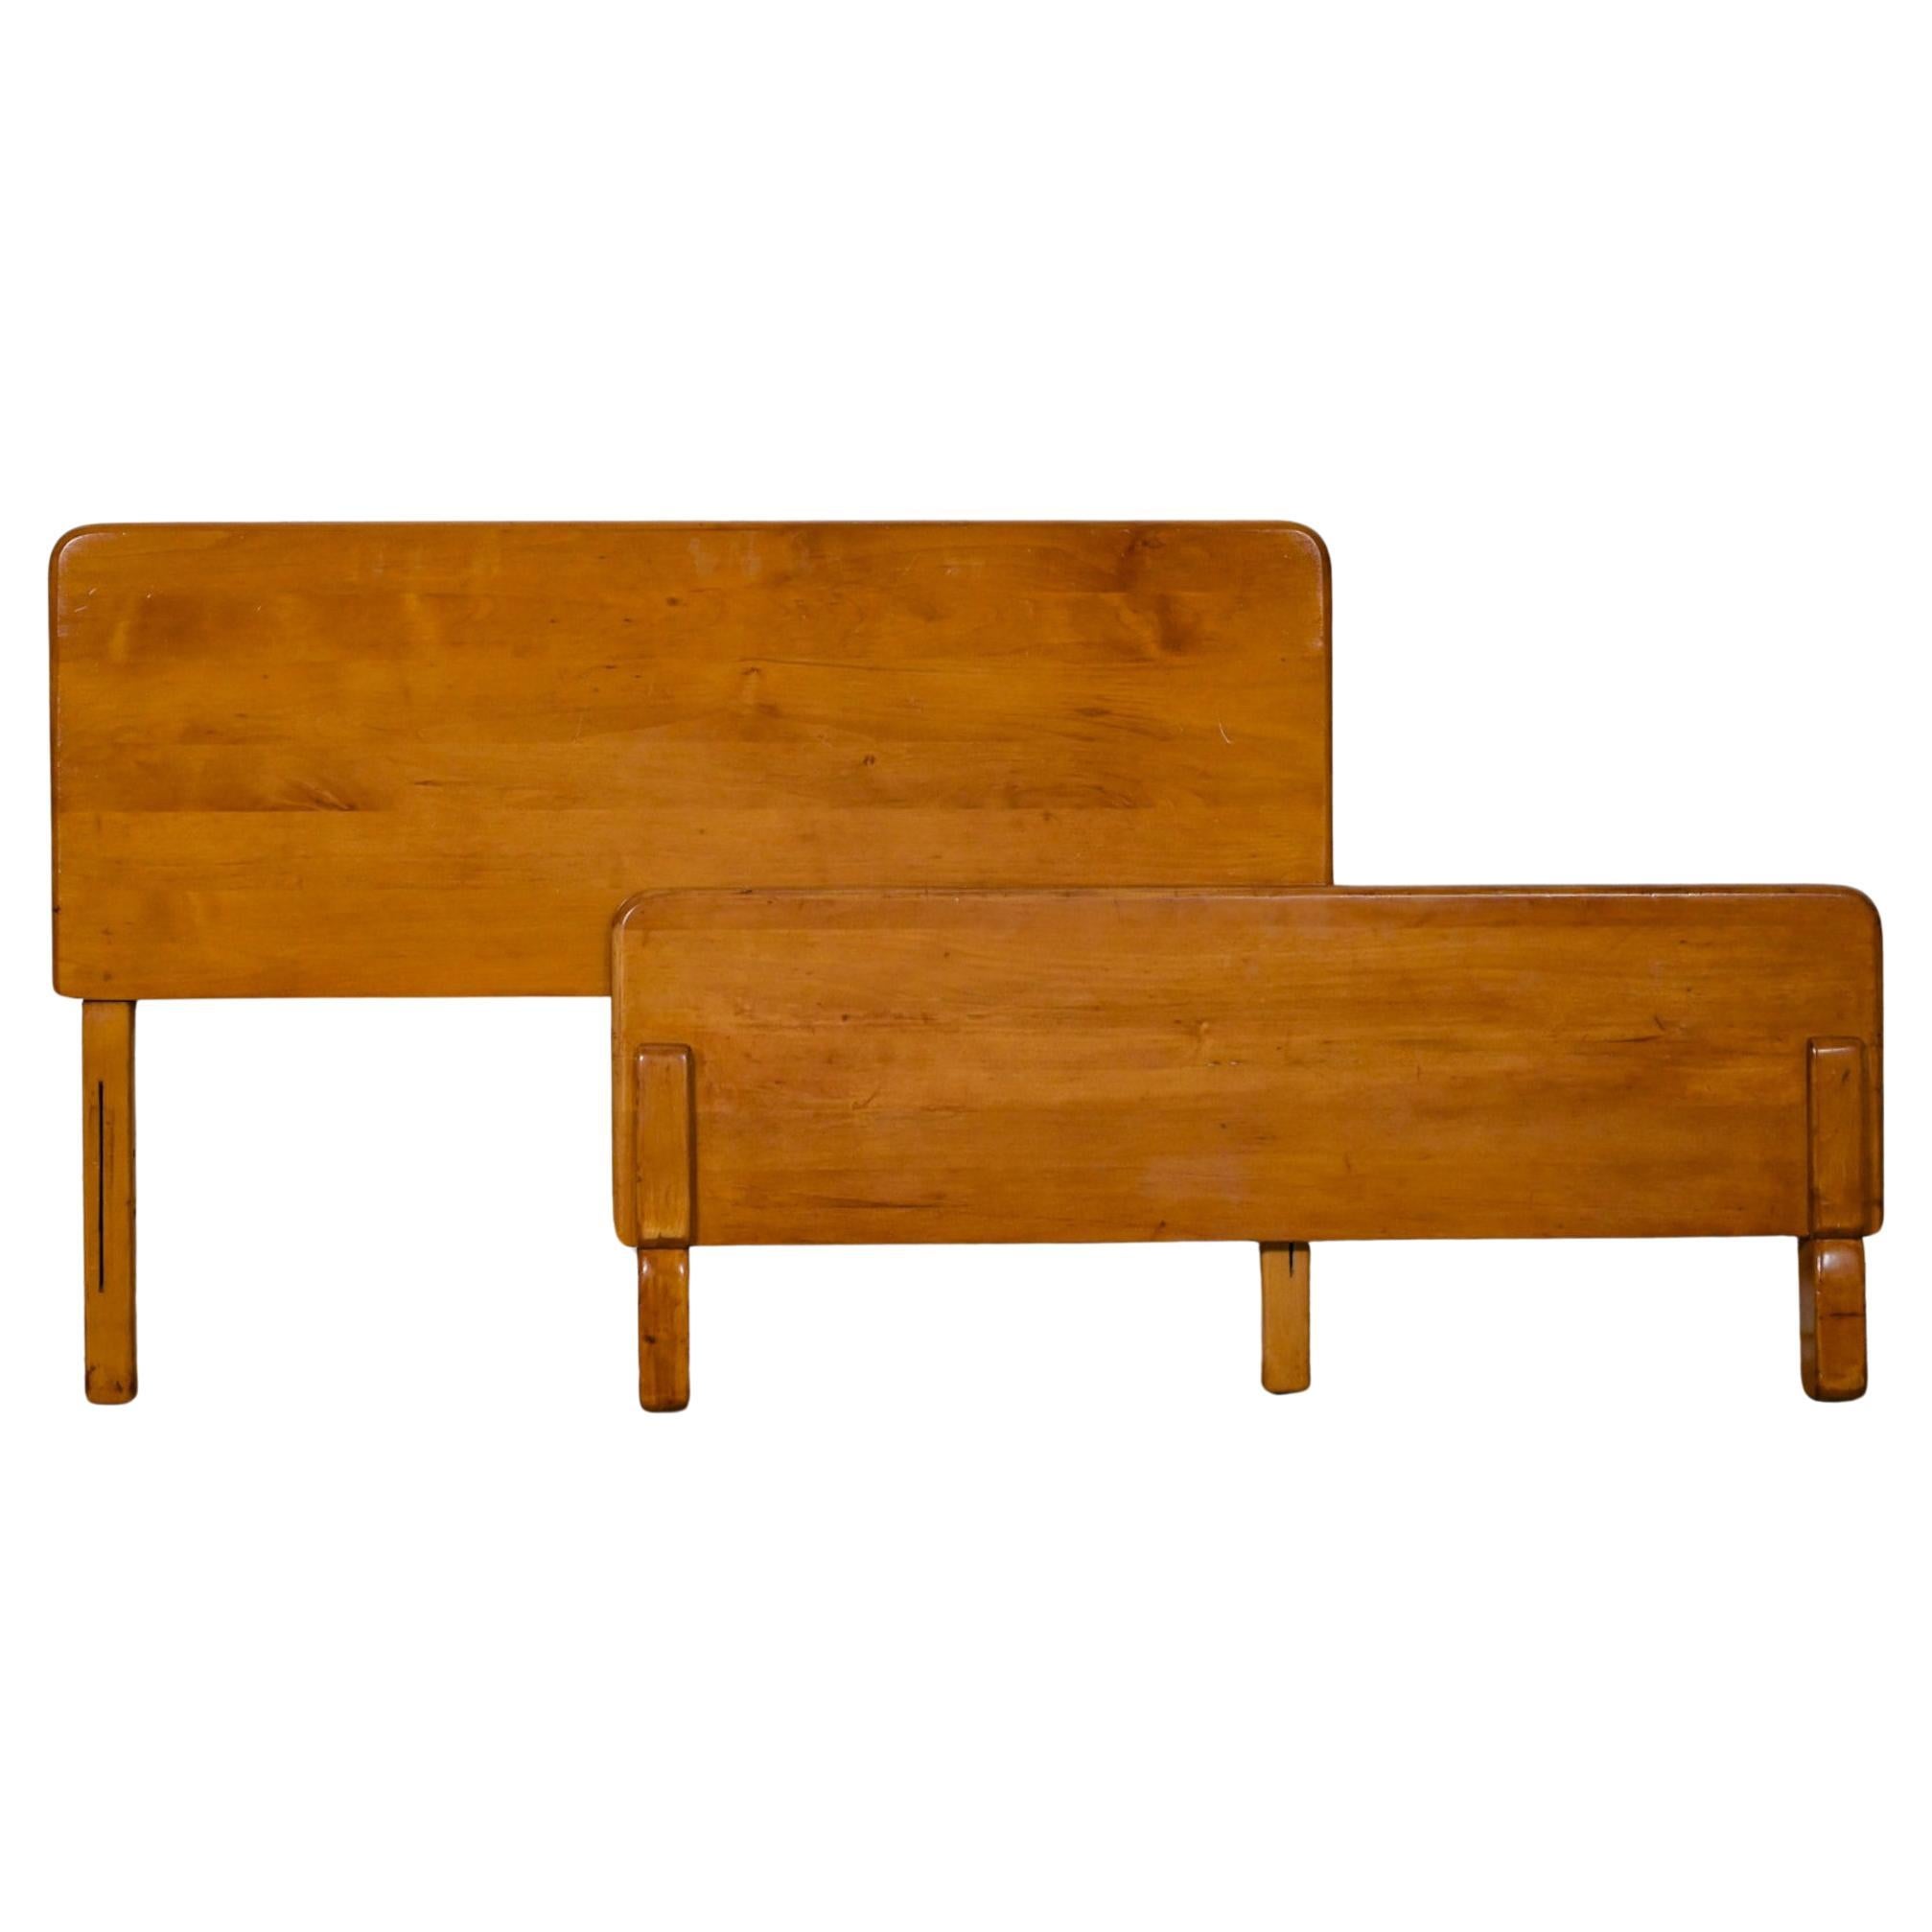 Early-Mid-20th Century Art Moderne Maple Twin Bed Headboard & Footboard  For Sale